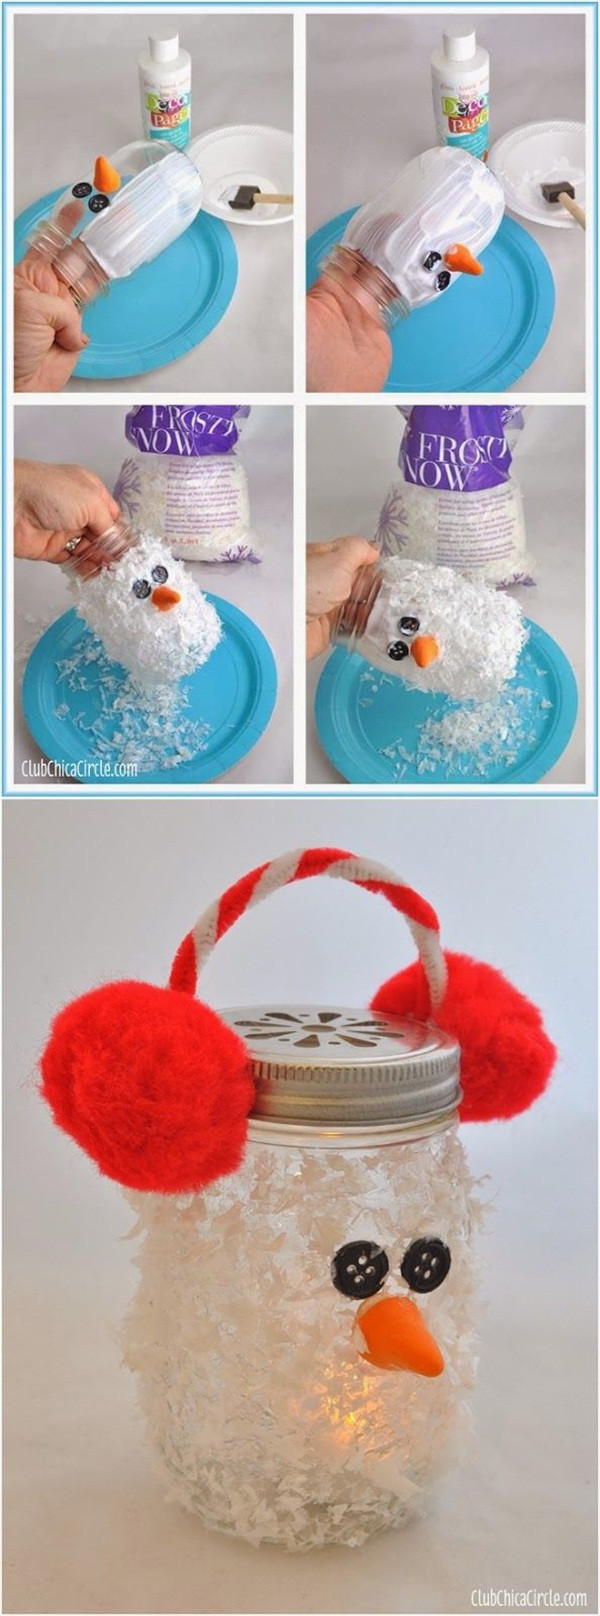 Craft Ideas For Toddlers
 37 Super Easy DIY Christmas Crafts Ideas for Kids